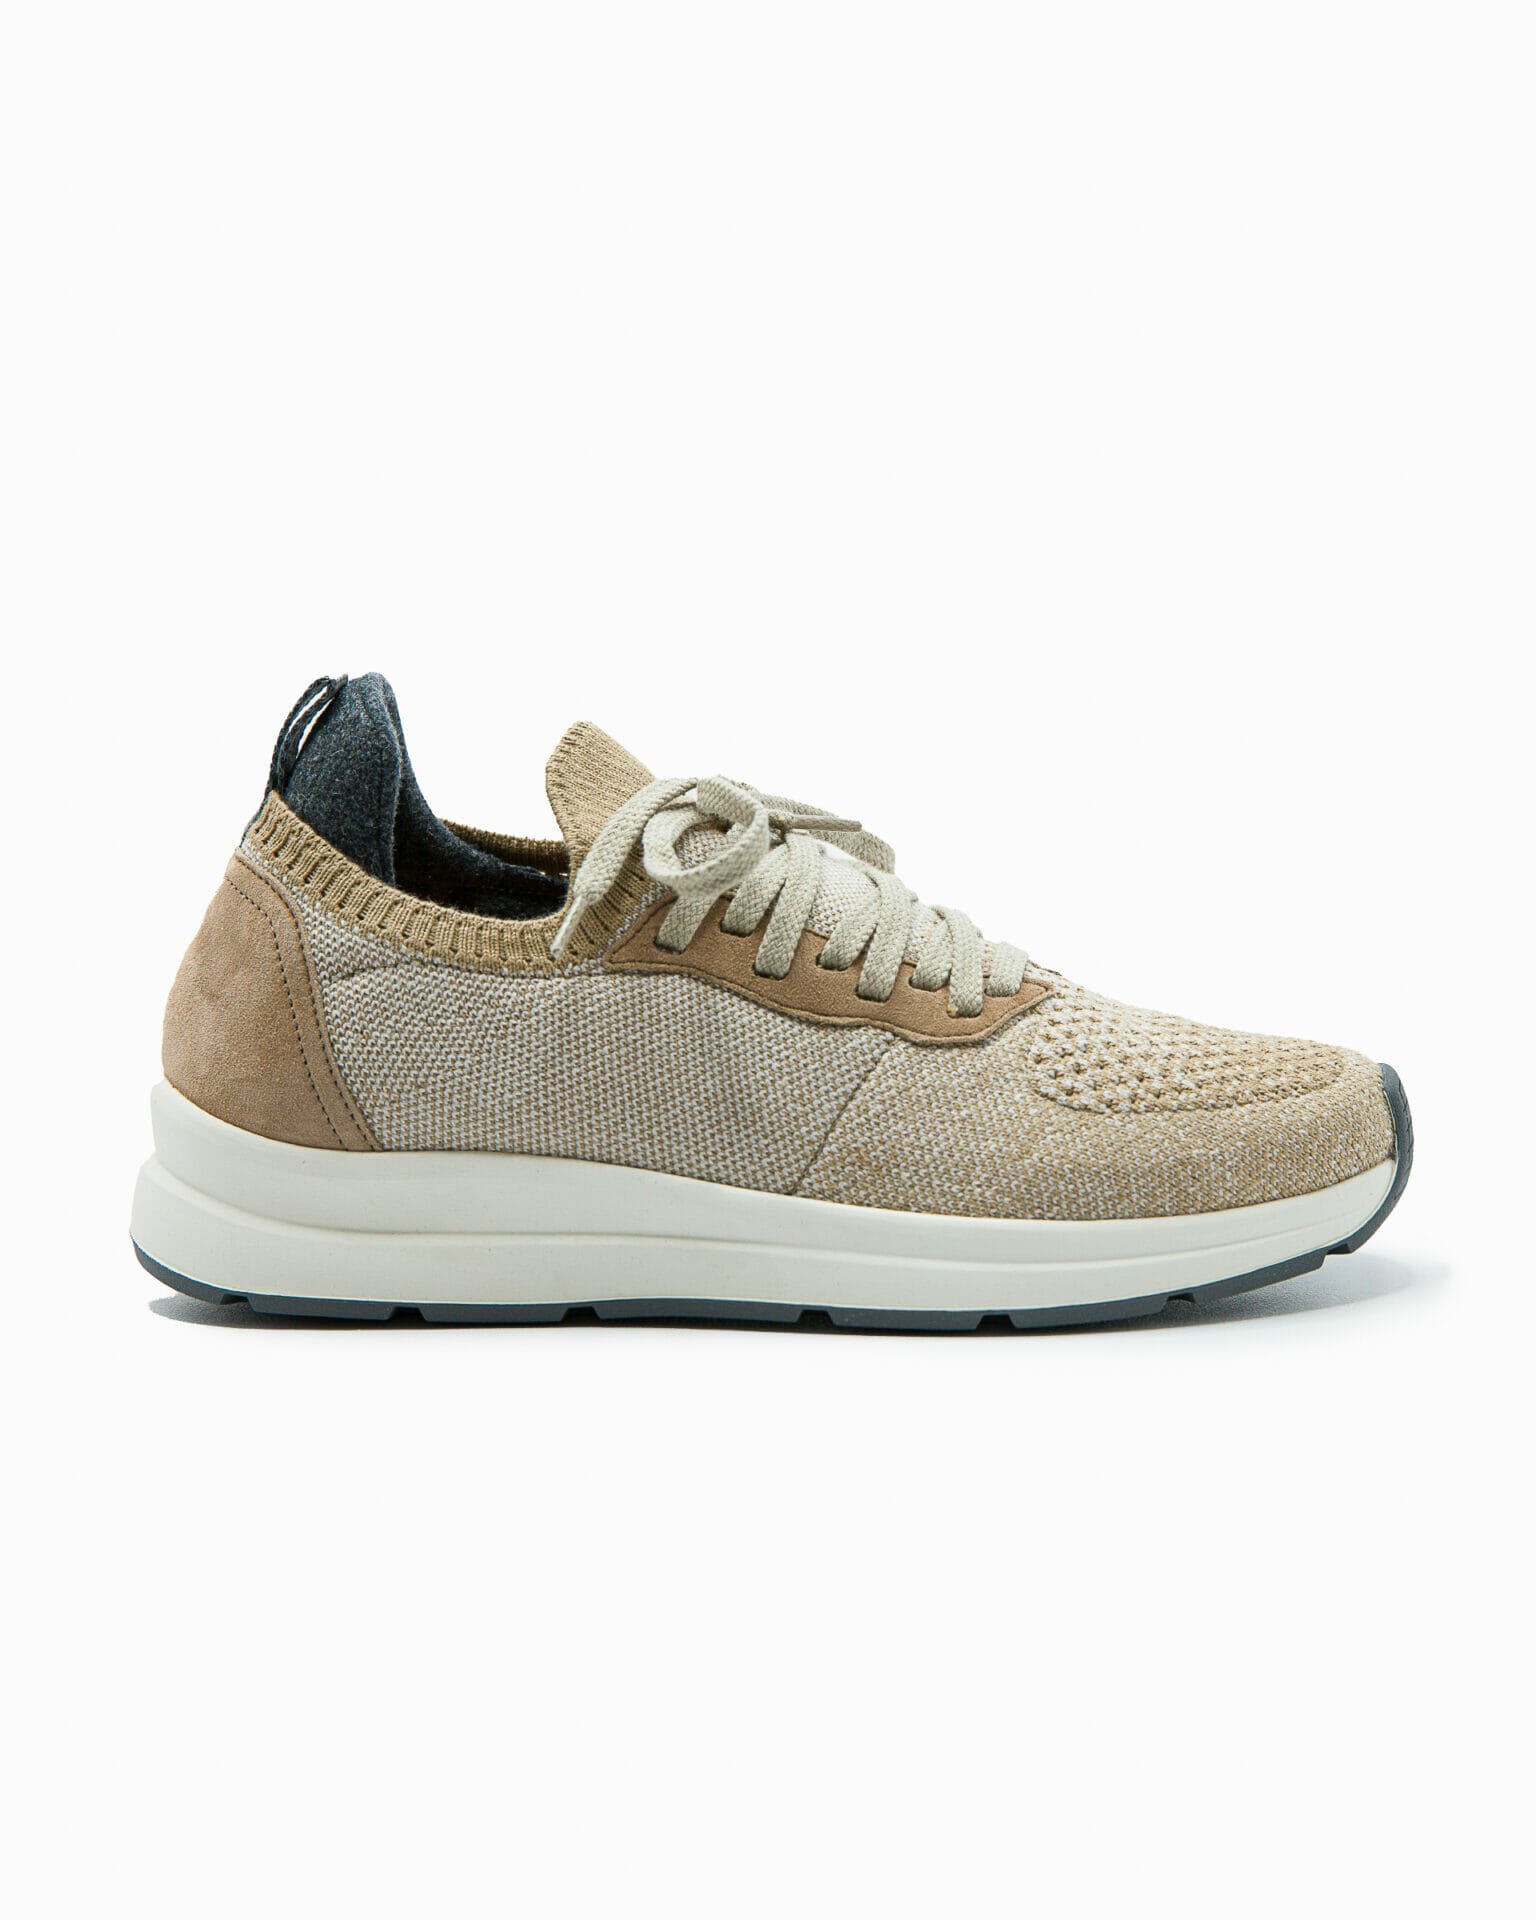 W-DRAGON D PARK AVENUE FASHION CLOTH/SUEDE SNEAKERS FOR WOMEN PROVIDED OF  LIGHT WOOL LINING